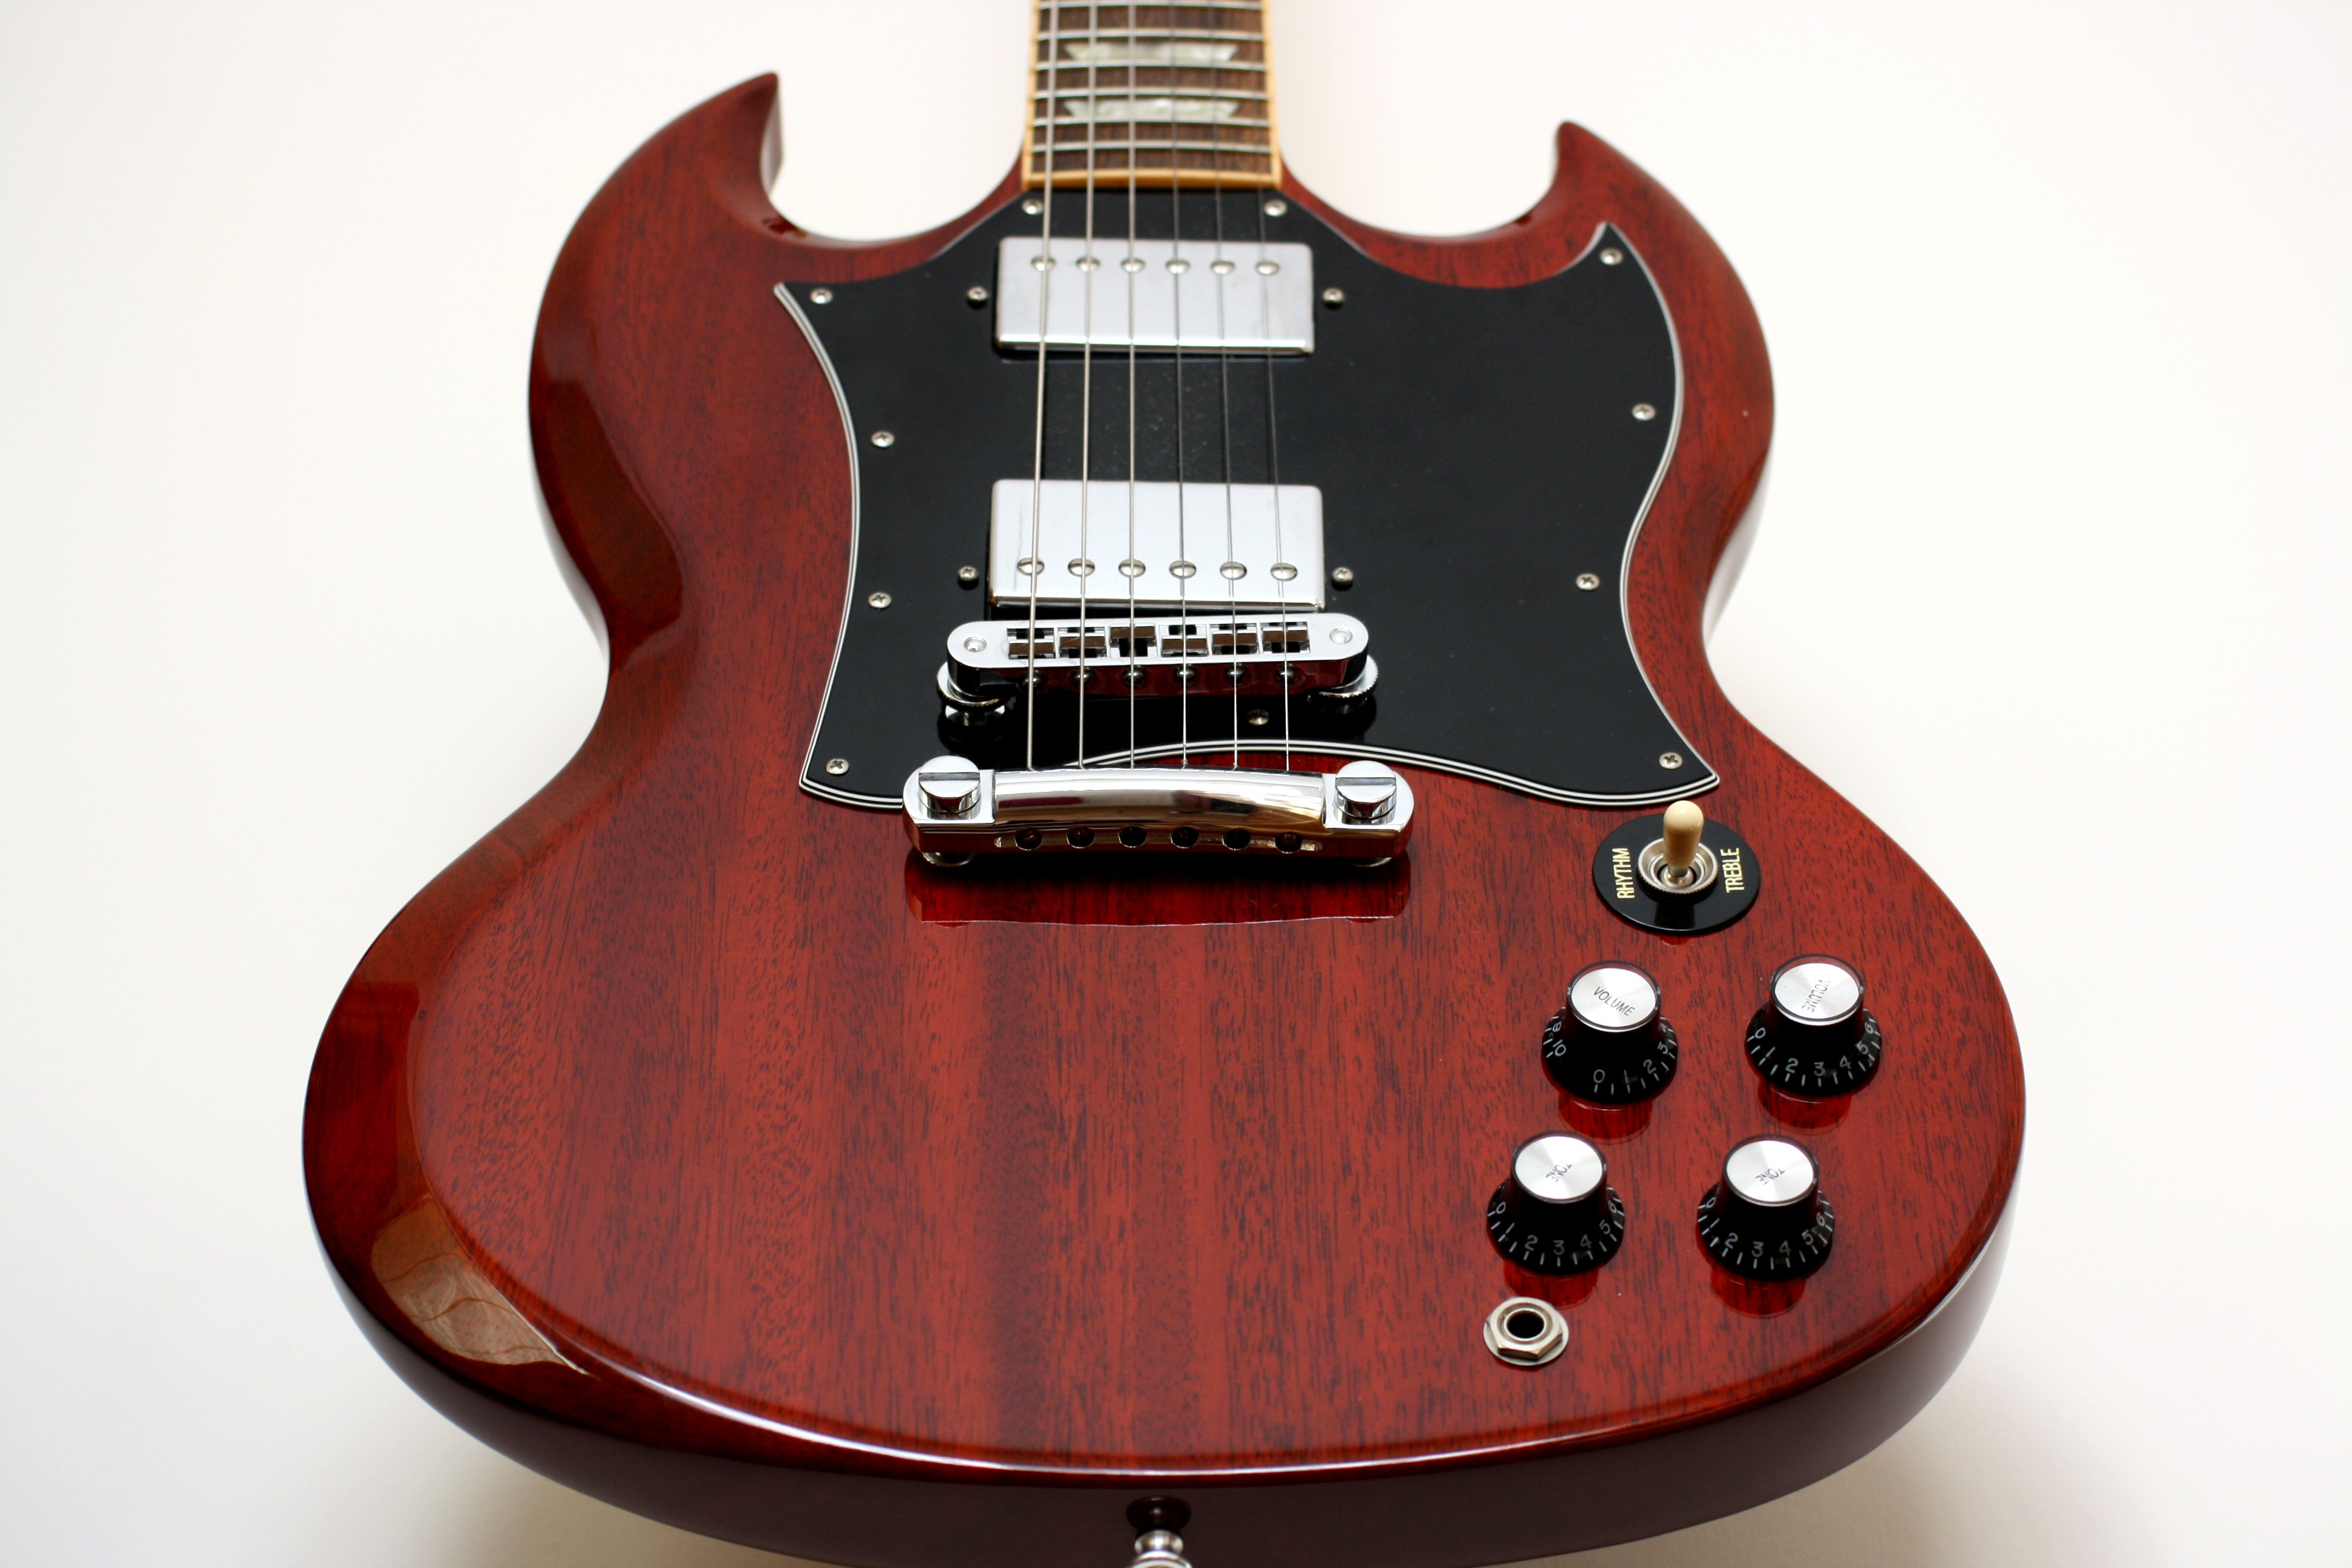 File:Gibson SG body from bottom (2012-12-25 12.28.49 by Megan